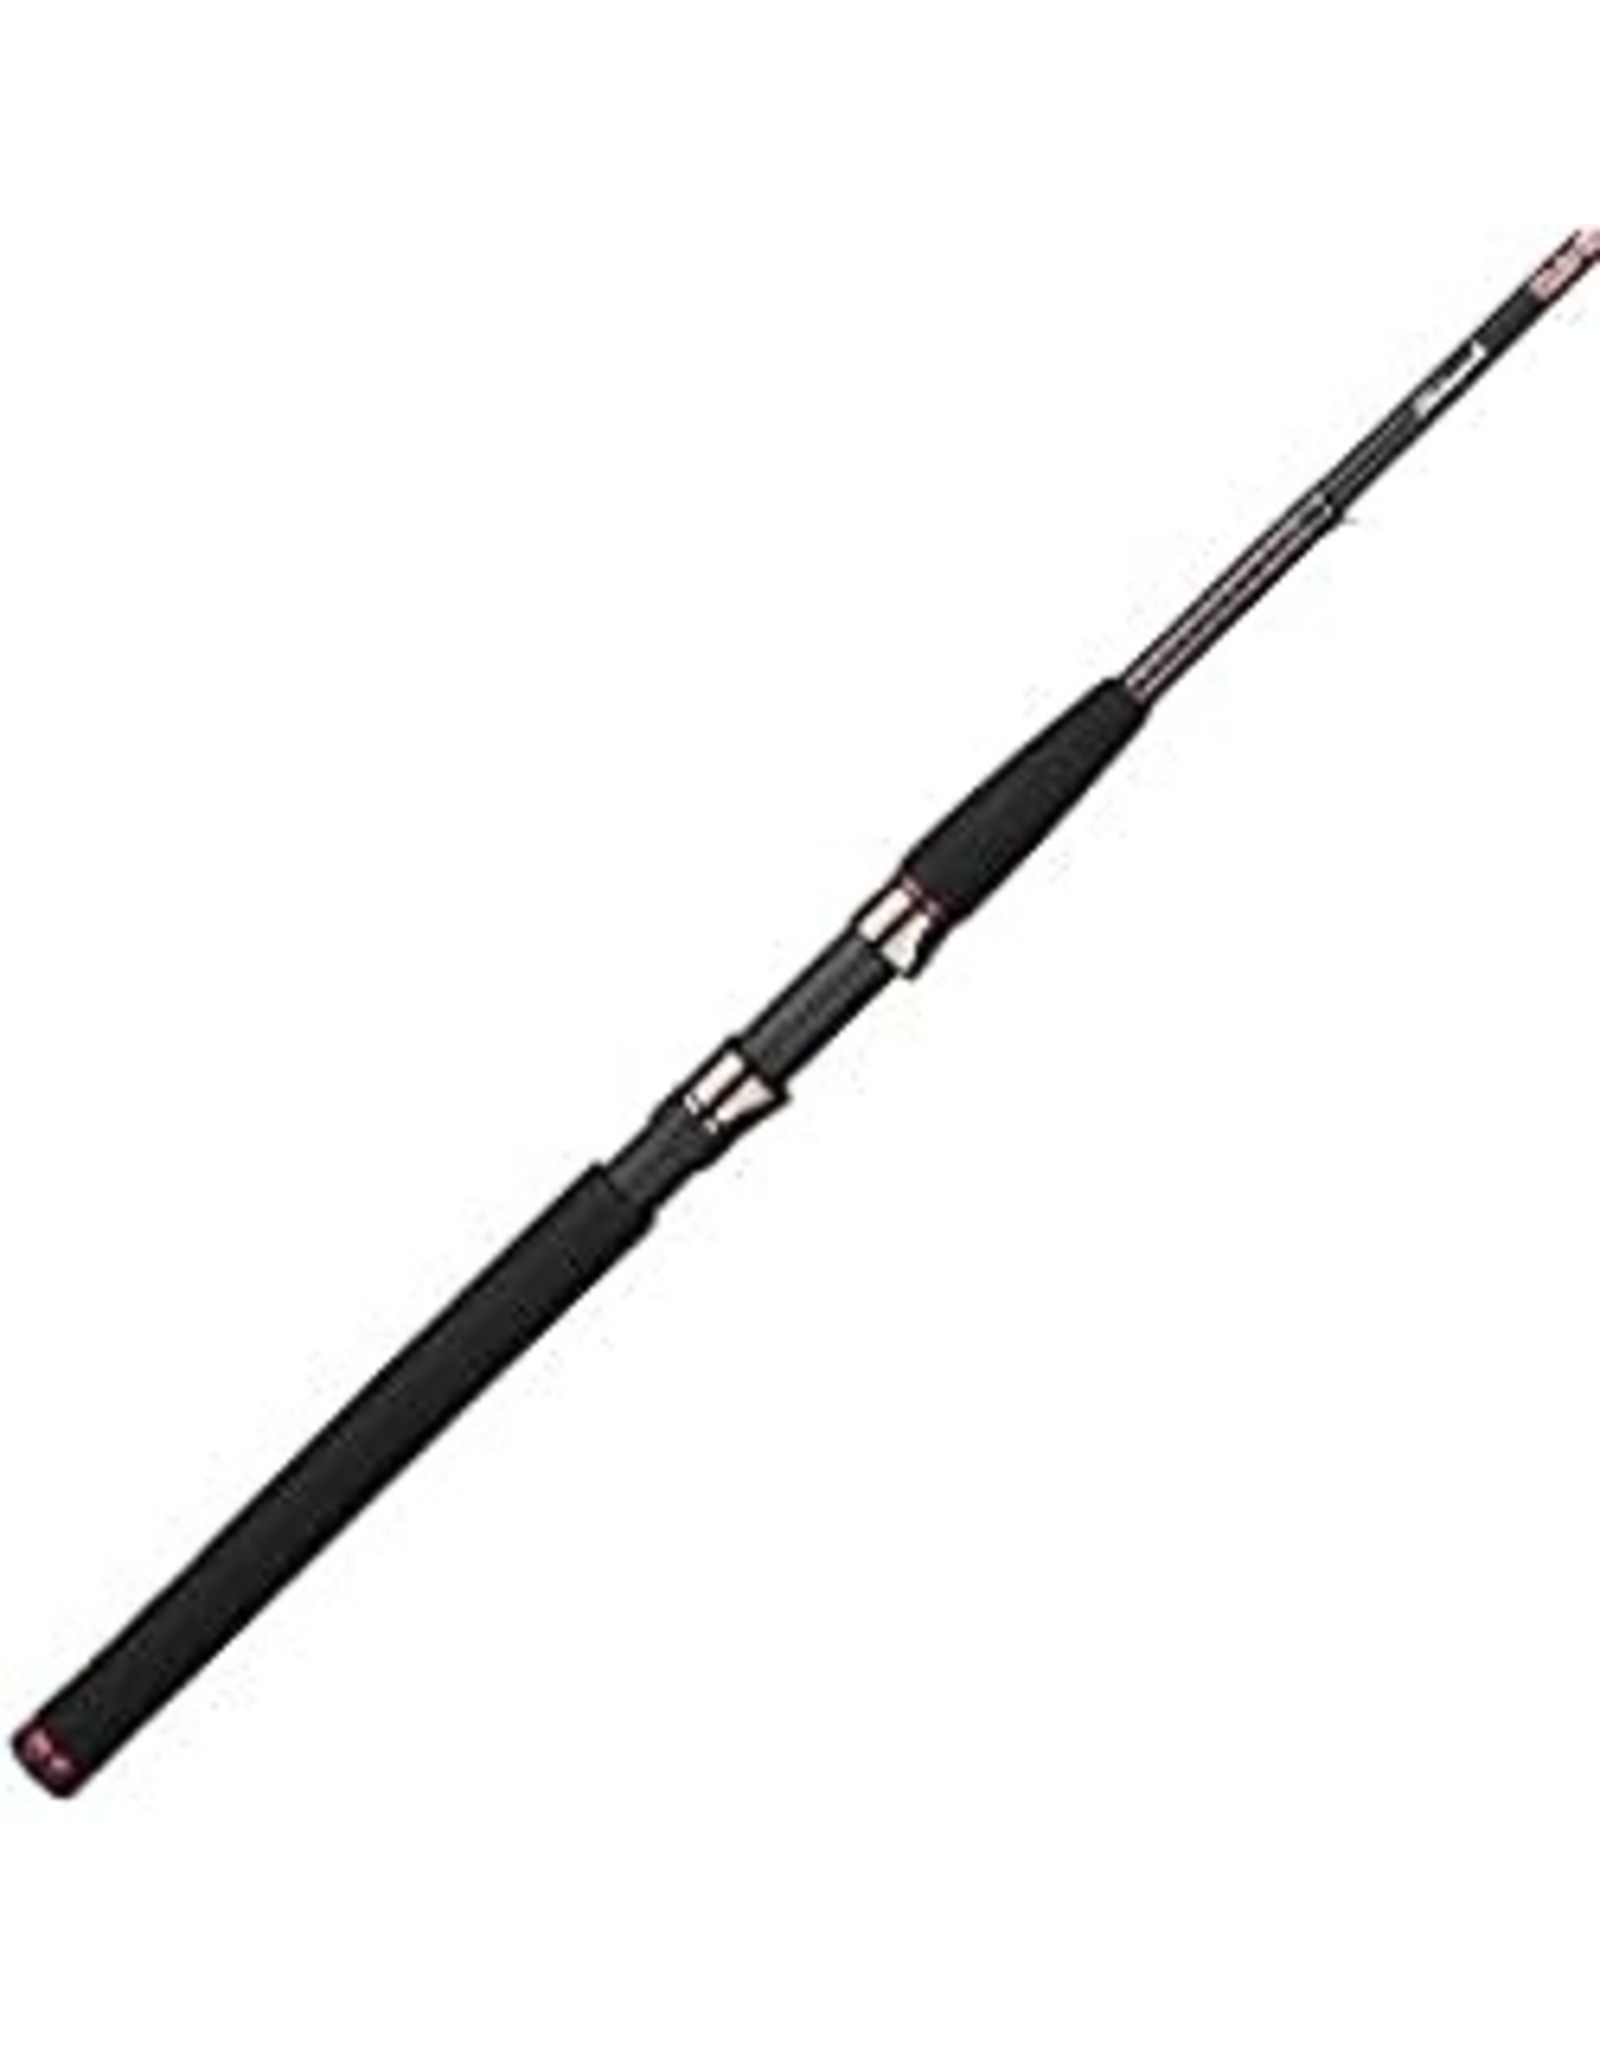 Shakespeare MGSP702L Micro Spinning Rod, 7', 2 Pc, LT, 1/16-3/8 oz -  Larry's Sporting Goods